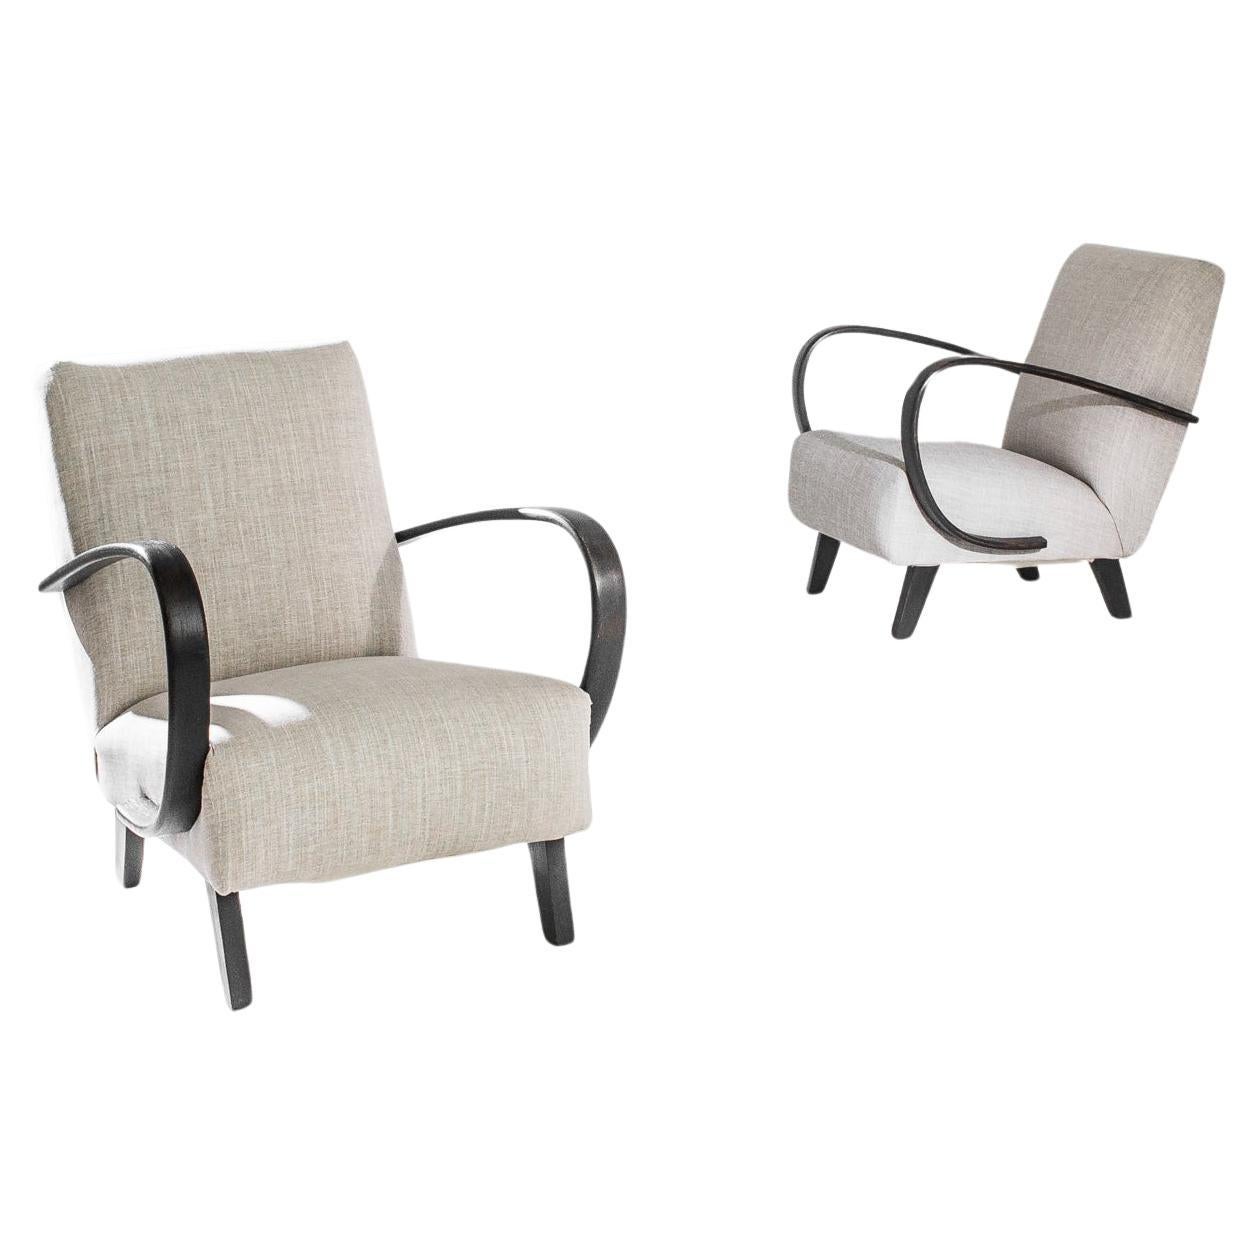 1950s H-410 Armchairs by J. Halabala, a Pair For Sale